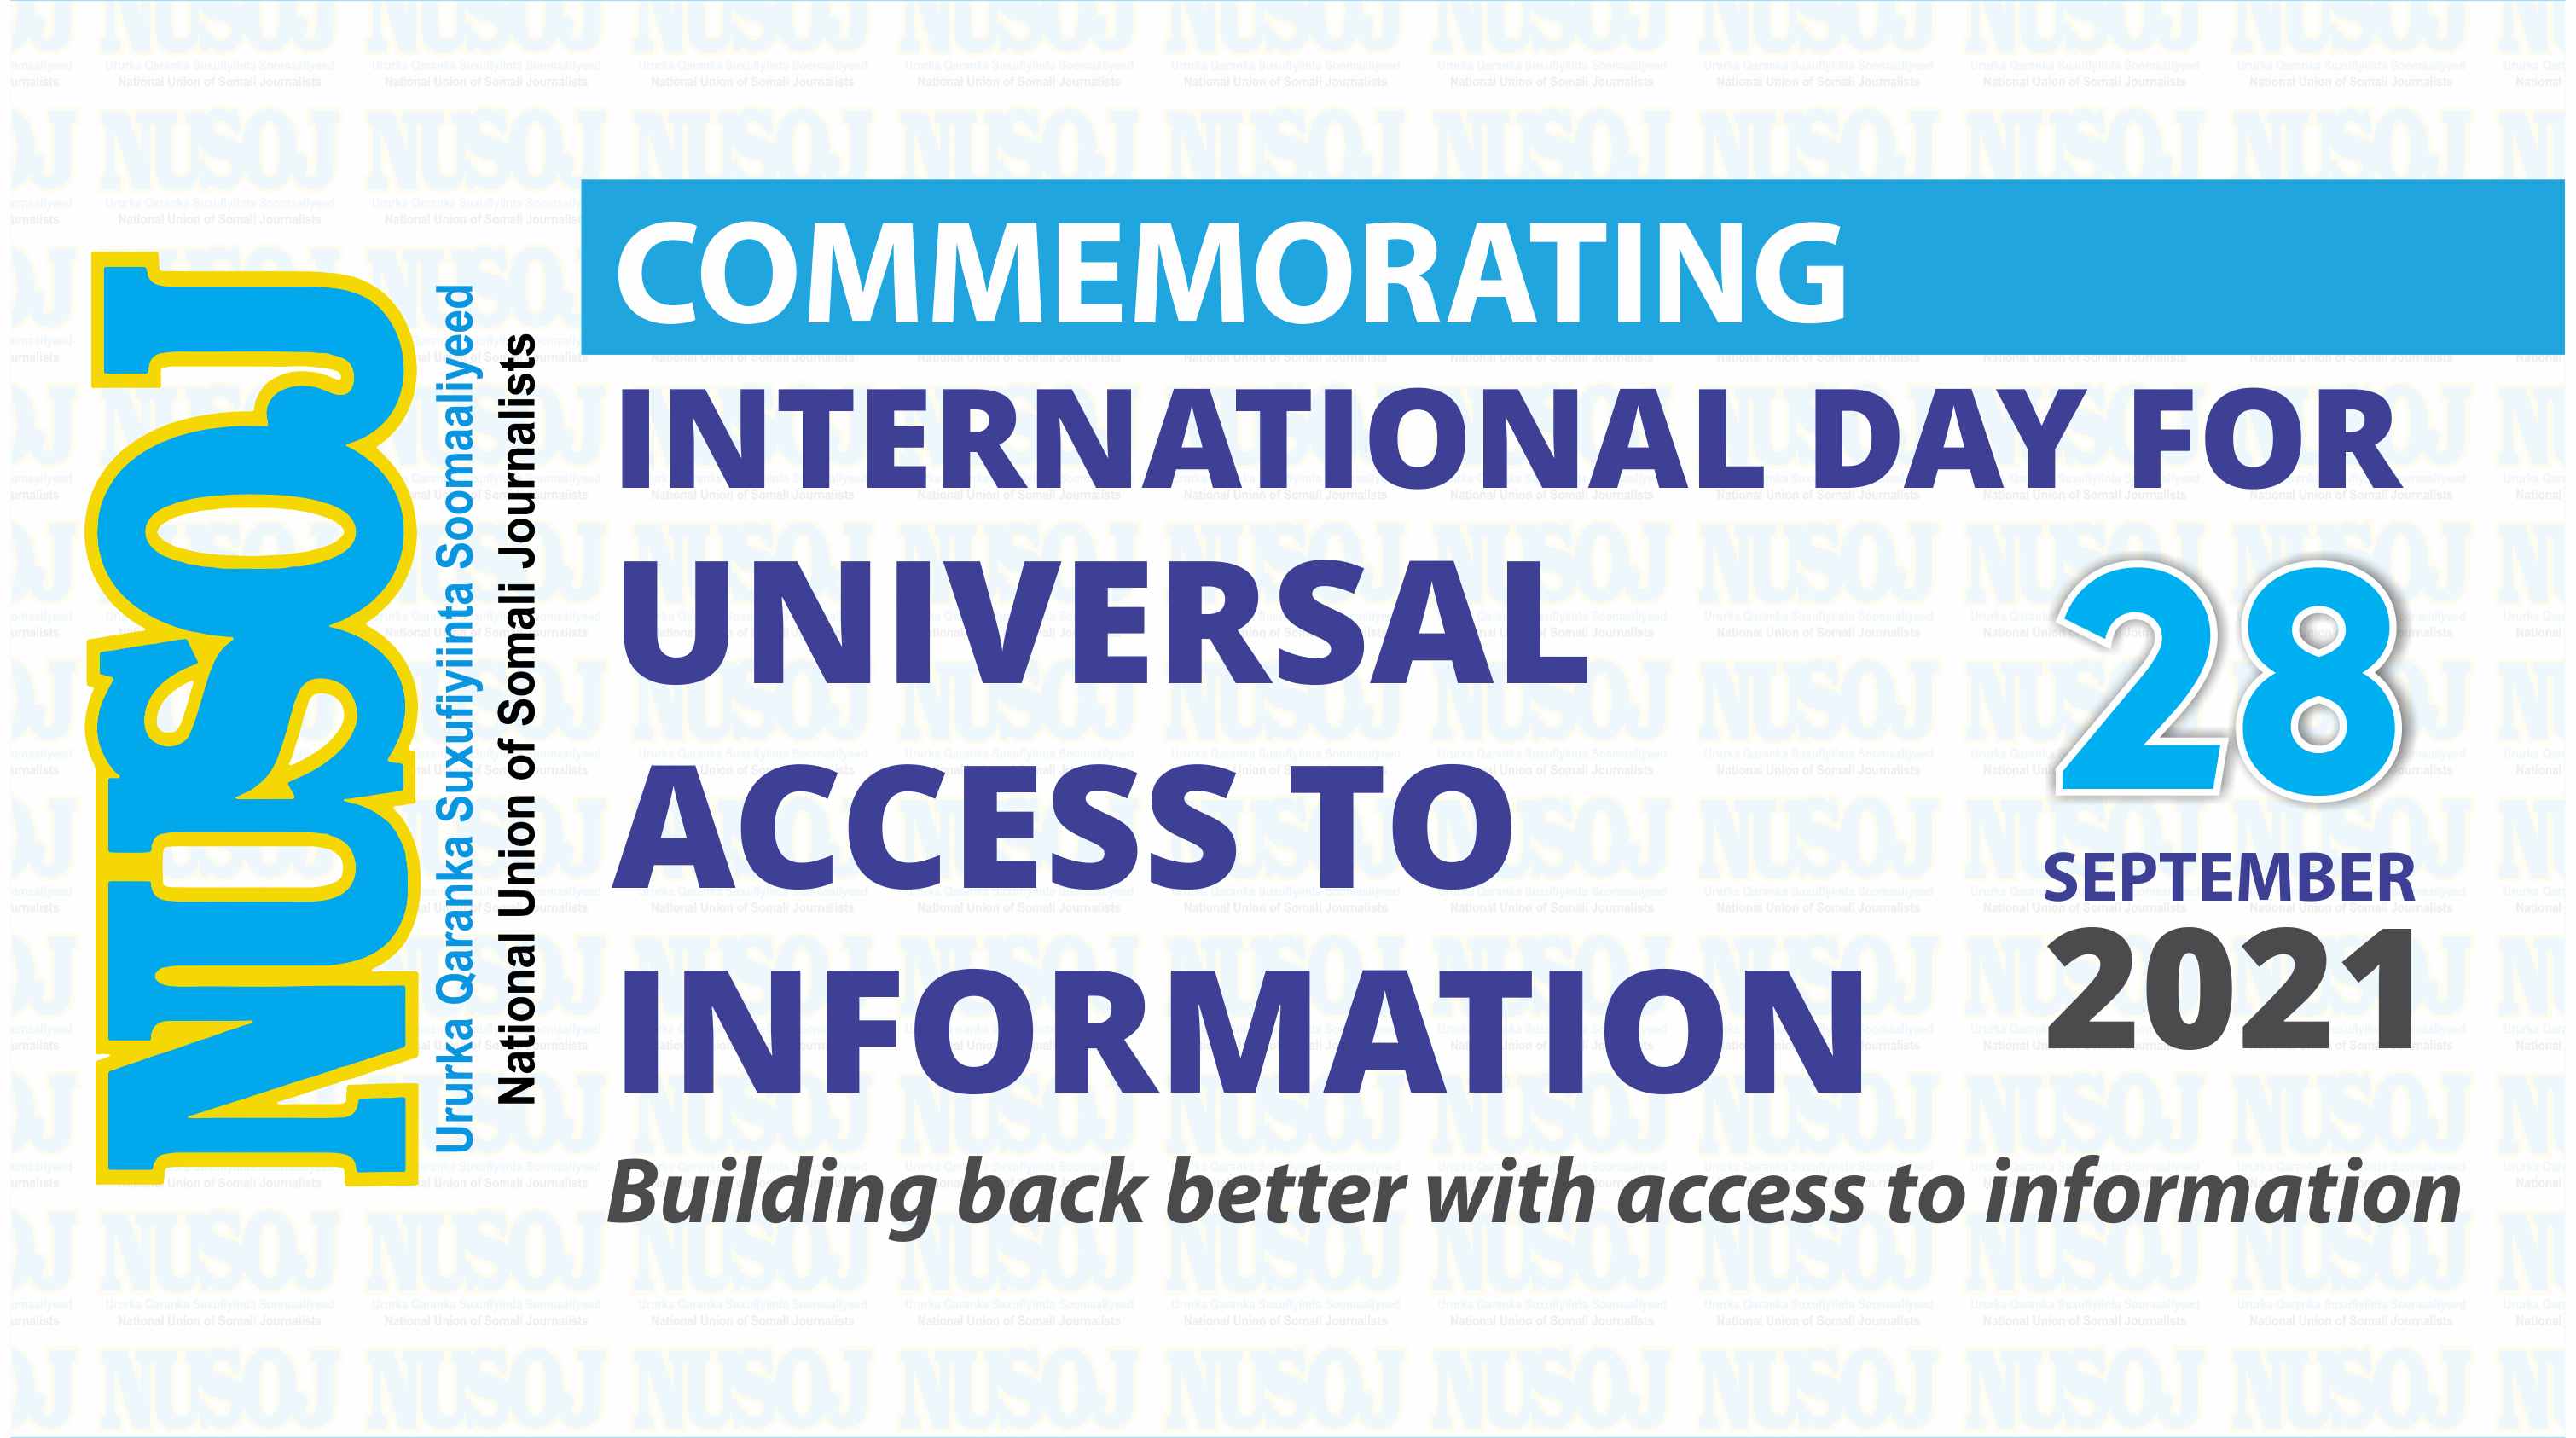 Building Back a Better Somalia with Access to Information is needed now more than ever, says NUSOJ on the International Day for Universal Access to Information